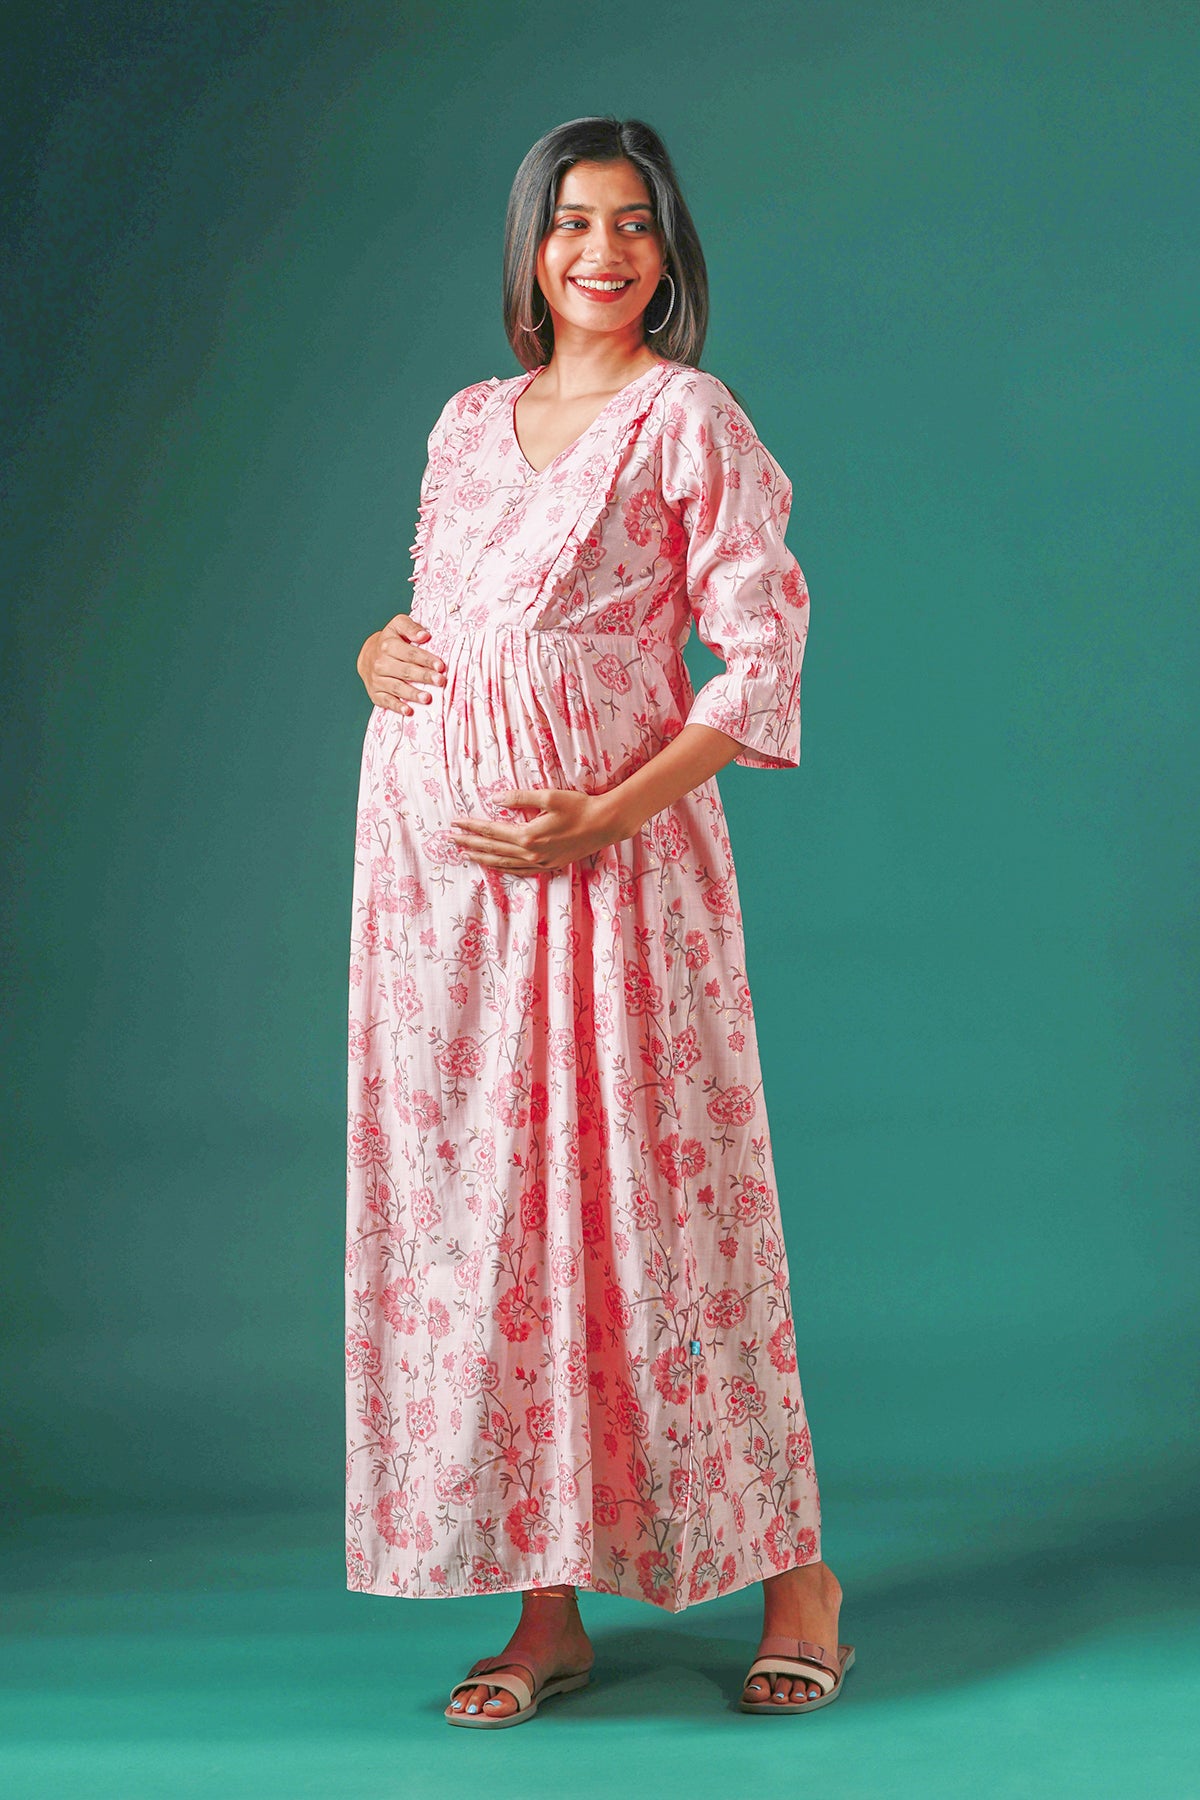 All Over Floral Printed Maternity Dress with Ruffled Yoke Pink